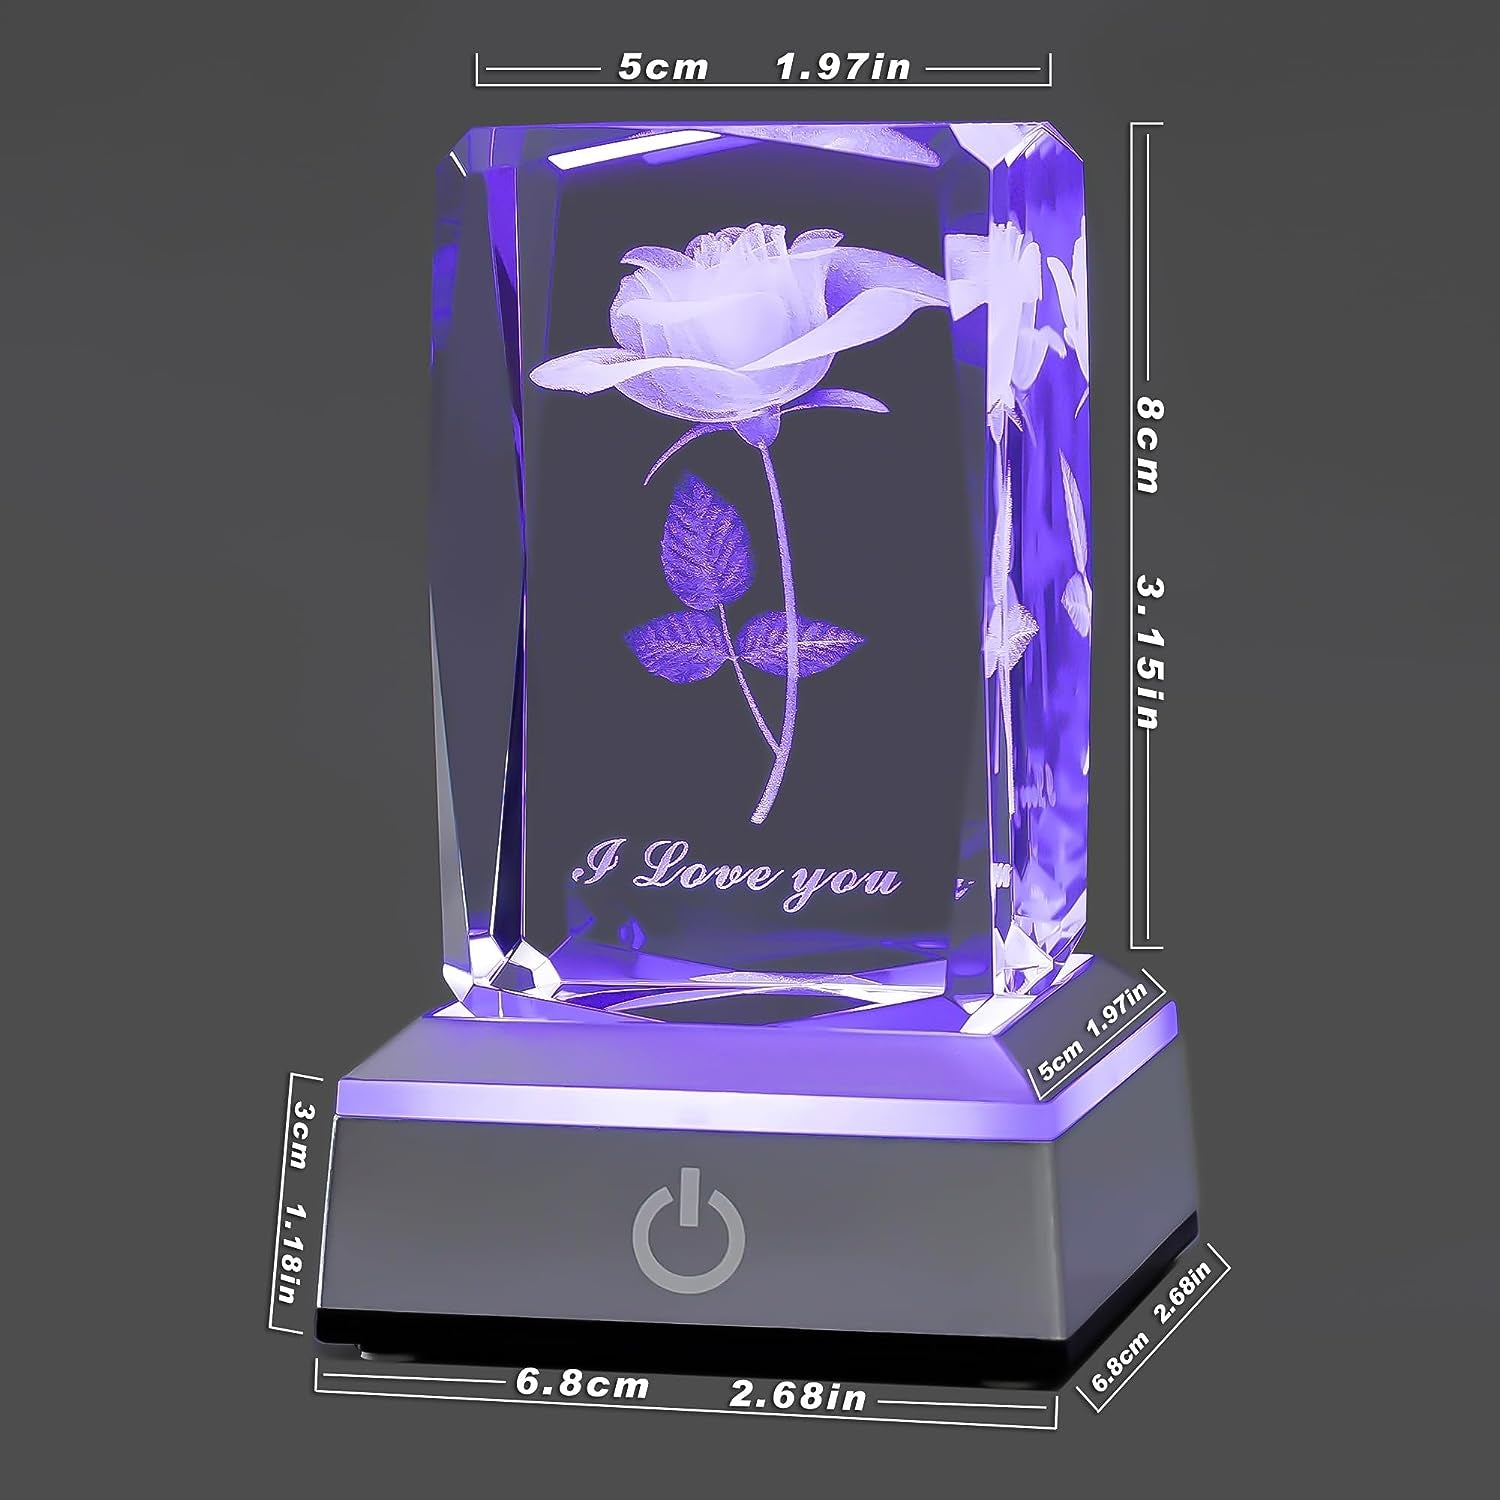 3D Rose Crystal Multicolor Nightlight - I Love You Decolamp - Perfect Valentines Day Gift Ideas for Her My Girlfriend Wife Mom - Unique Anniversary Birthday Presents